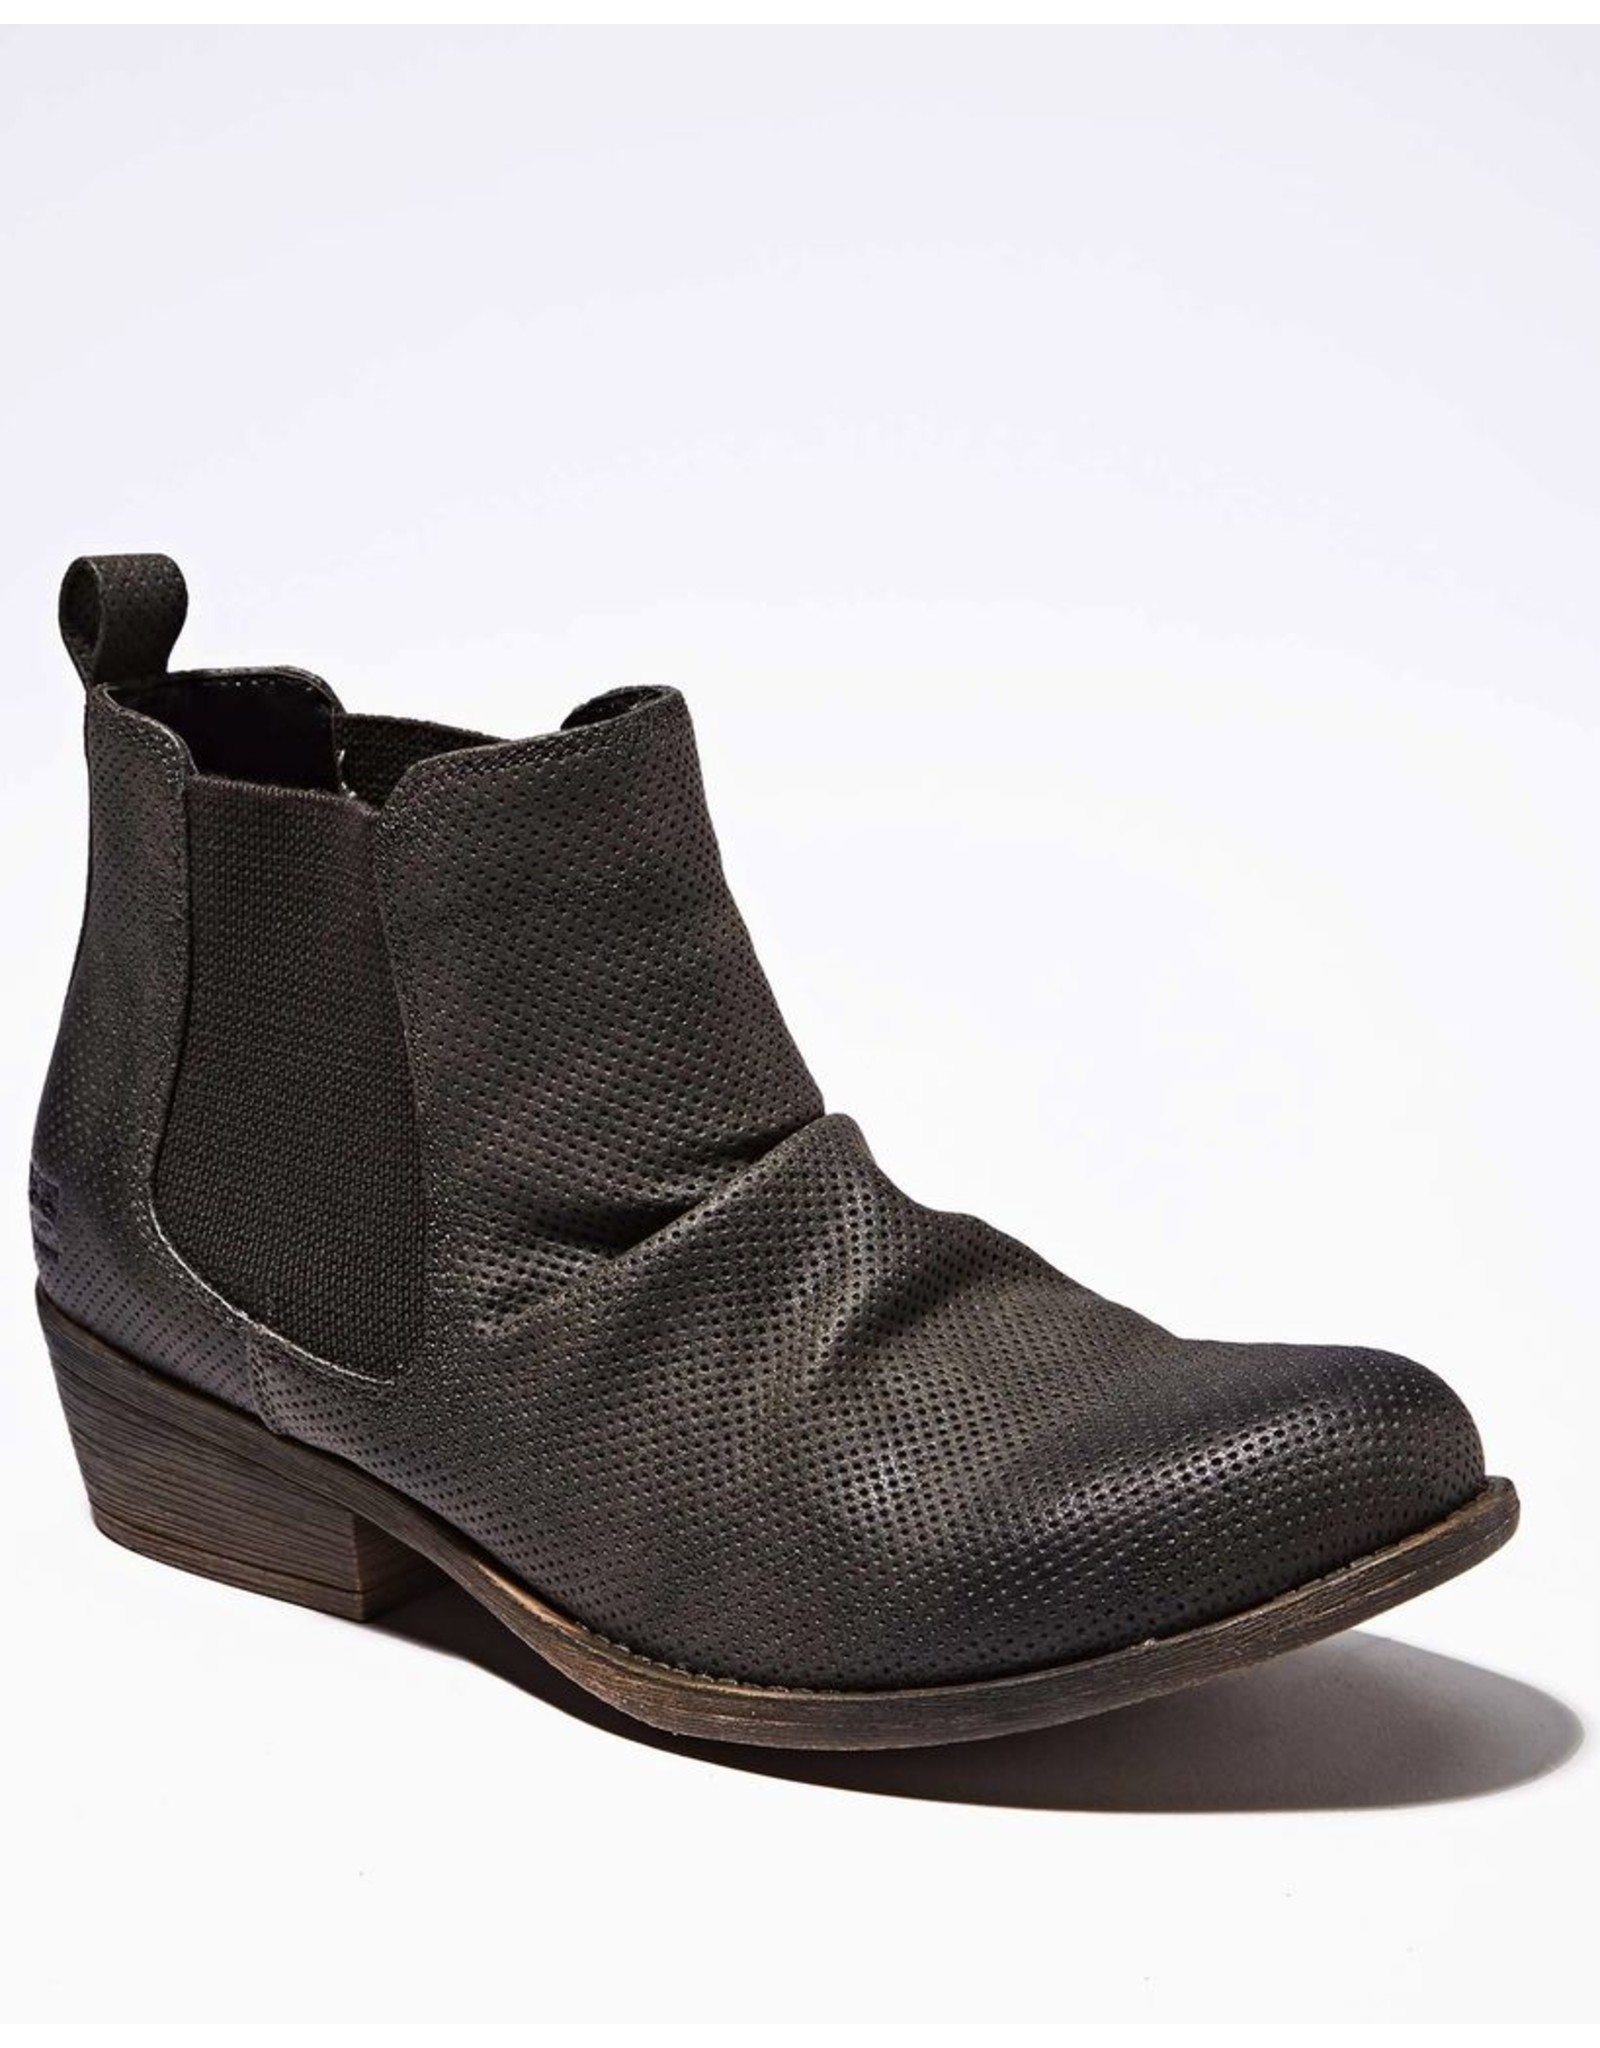 SWEET SURRENDER ANKLE BOOT - Salty's 